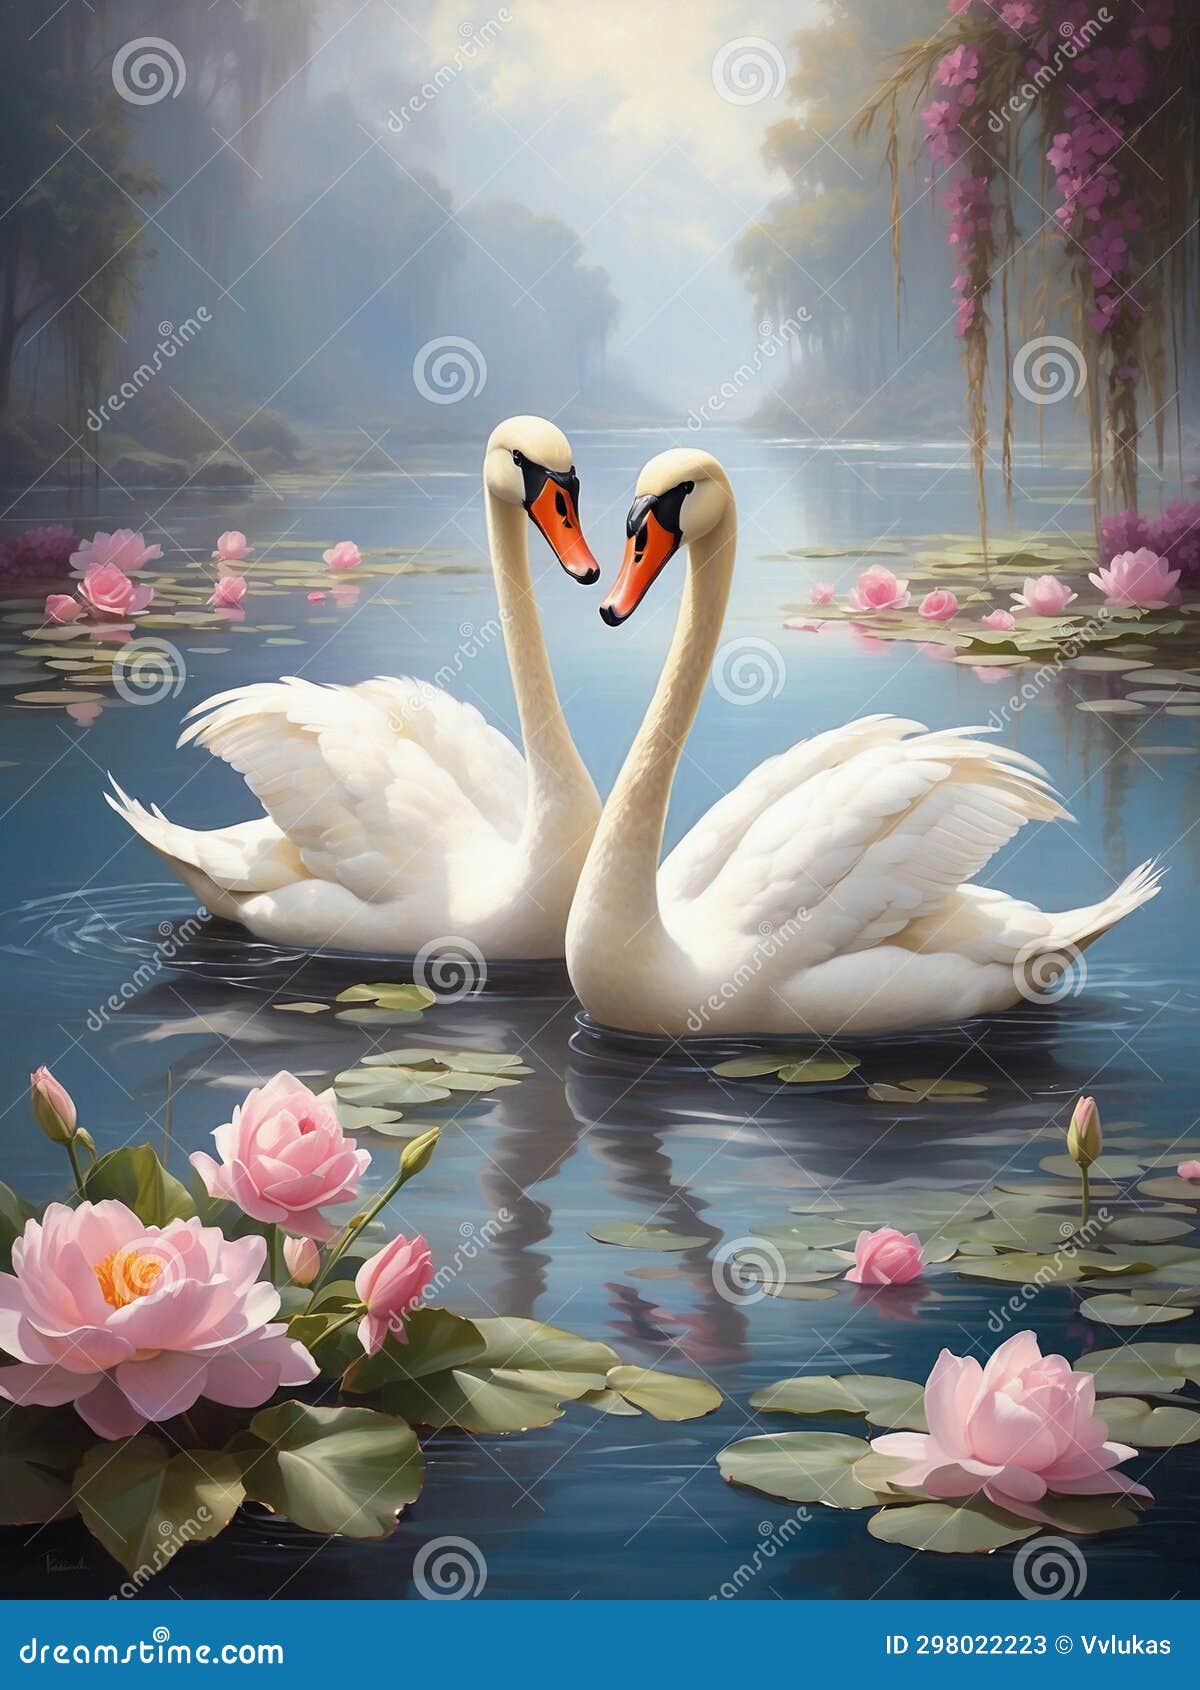 two elegant swans gracefully glide across a serene lake and water lilies.